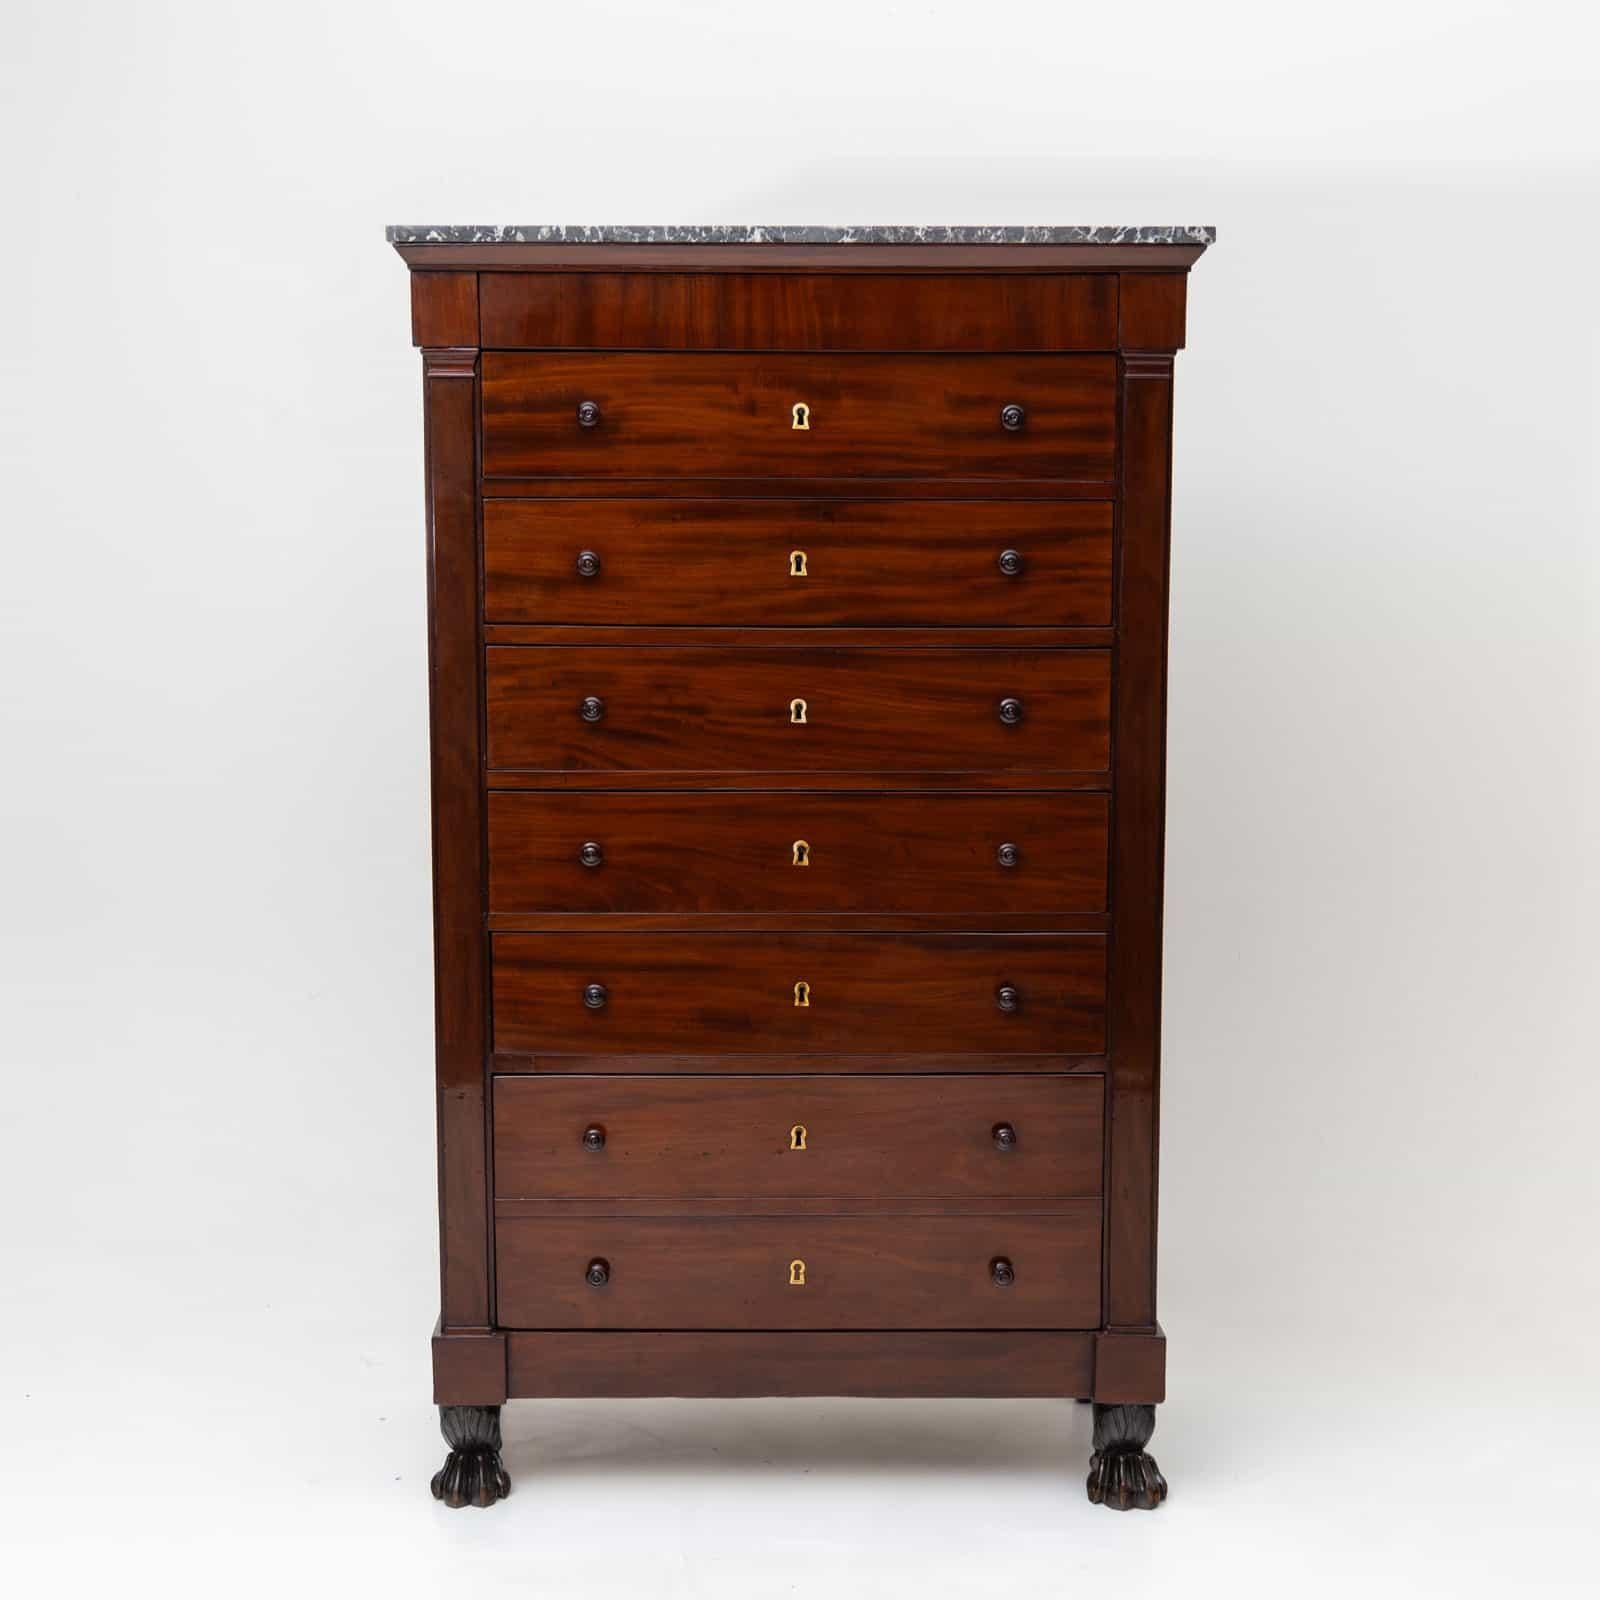 High chest of drawers or semainiere with seven large drawers and a concealed drawer under the marble top. The chest of drawers stands on carved lion paws and is accentuated by smooth pilasters on the sides. The body is veneered in mahogany and has